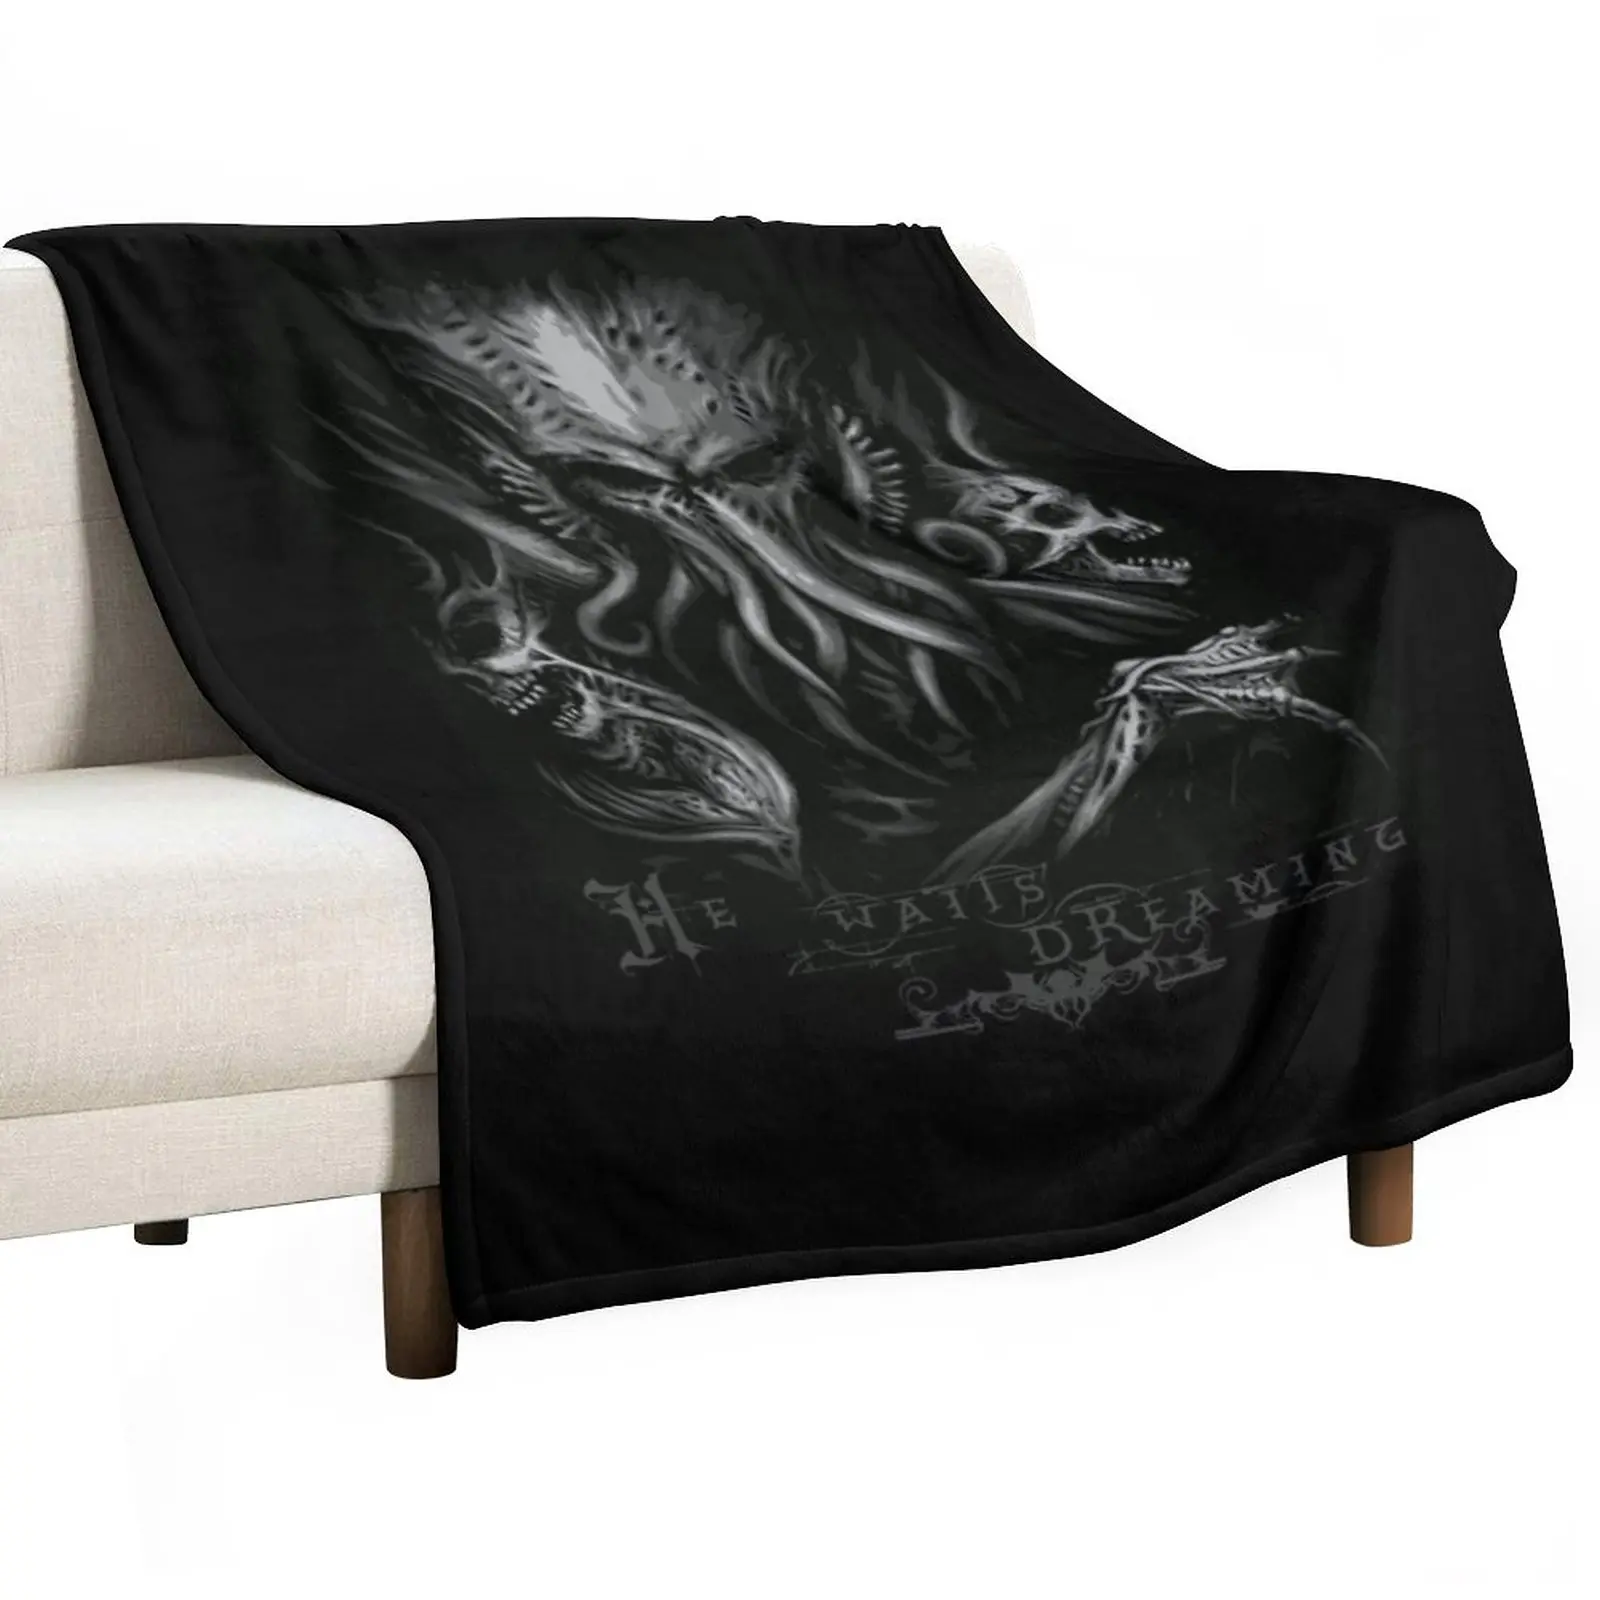 

Cthulhu 'He waits dreaming' (H.P. Lovecraft) Throw Blanket Softest Blanket Blankets Sofas Of Decoration Comforter Blanket